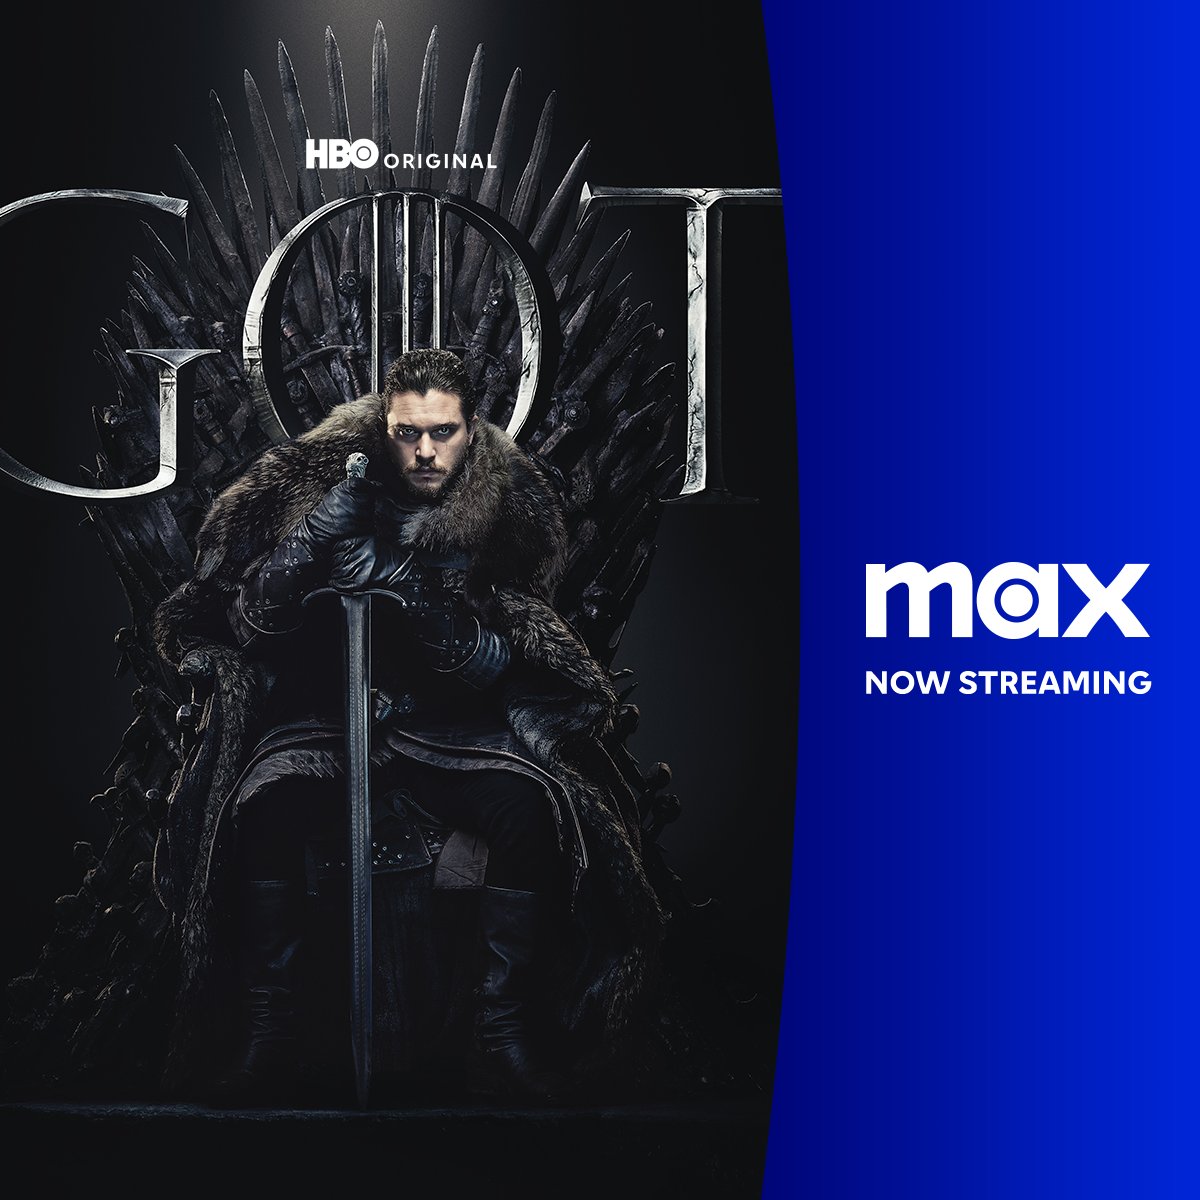 Westeros awaits. #GameofThrones is now streaming on Max. #TheOnetoWatch @StreamOnMax